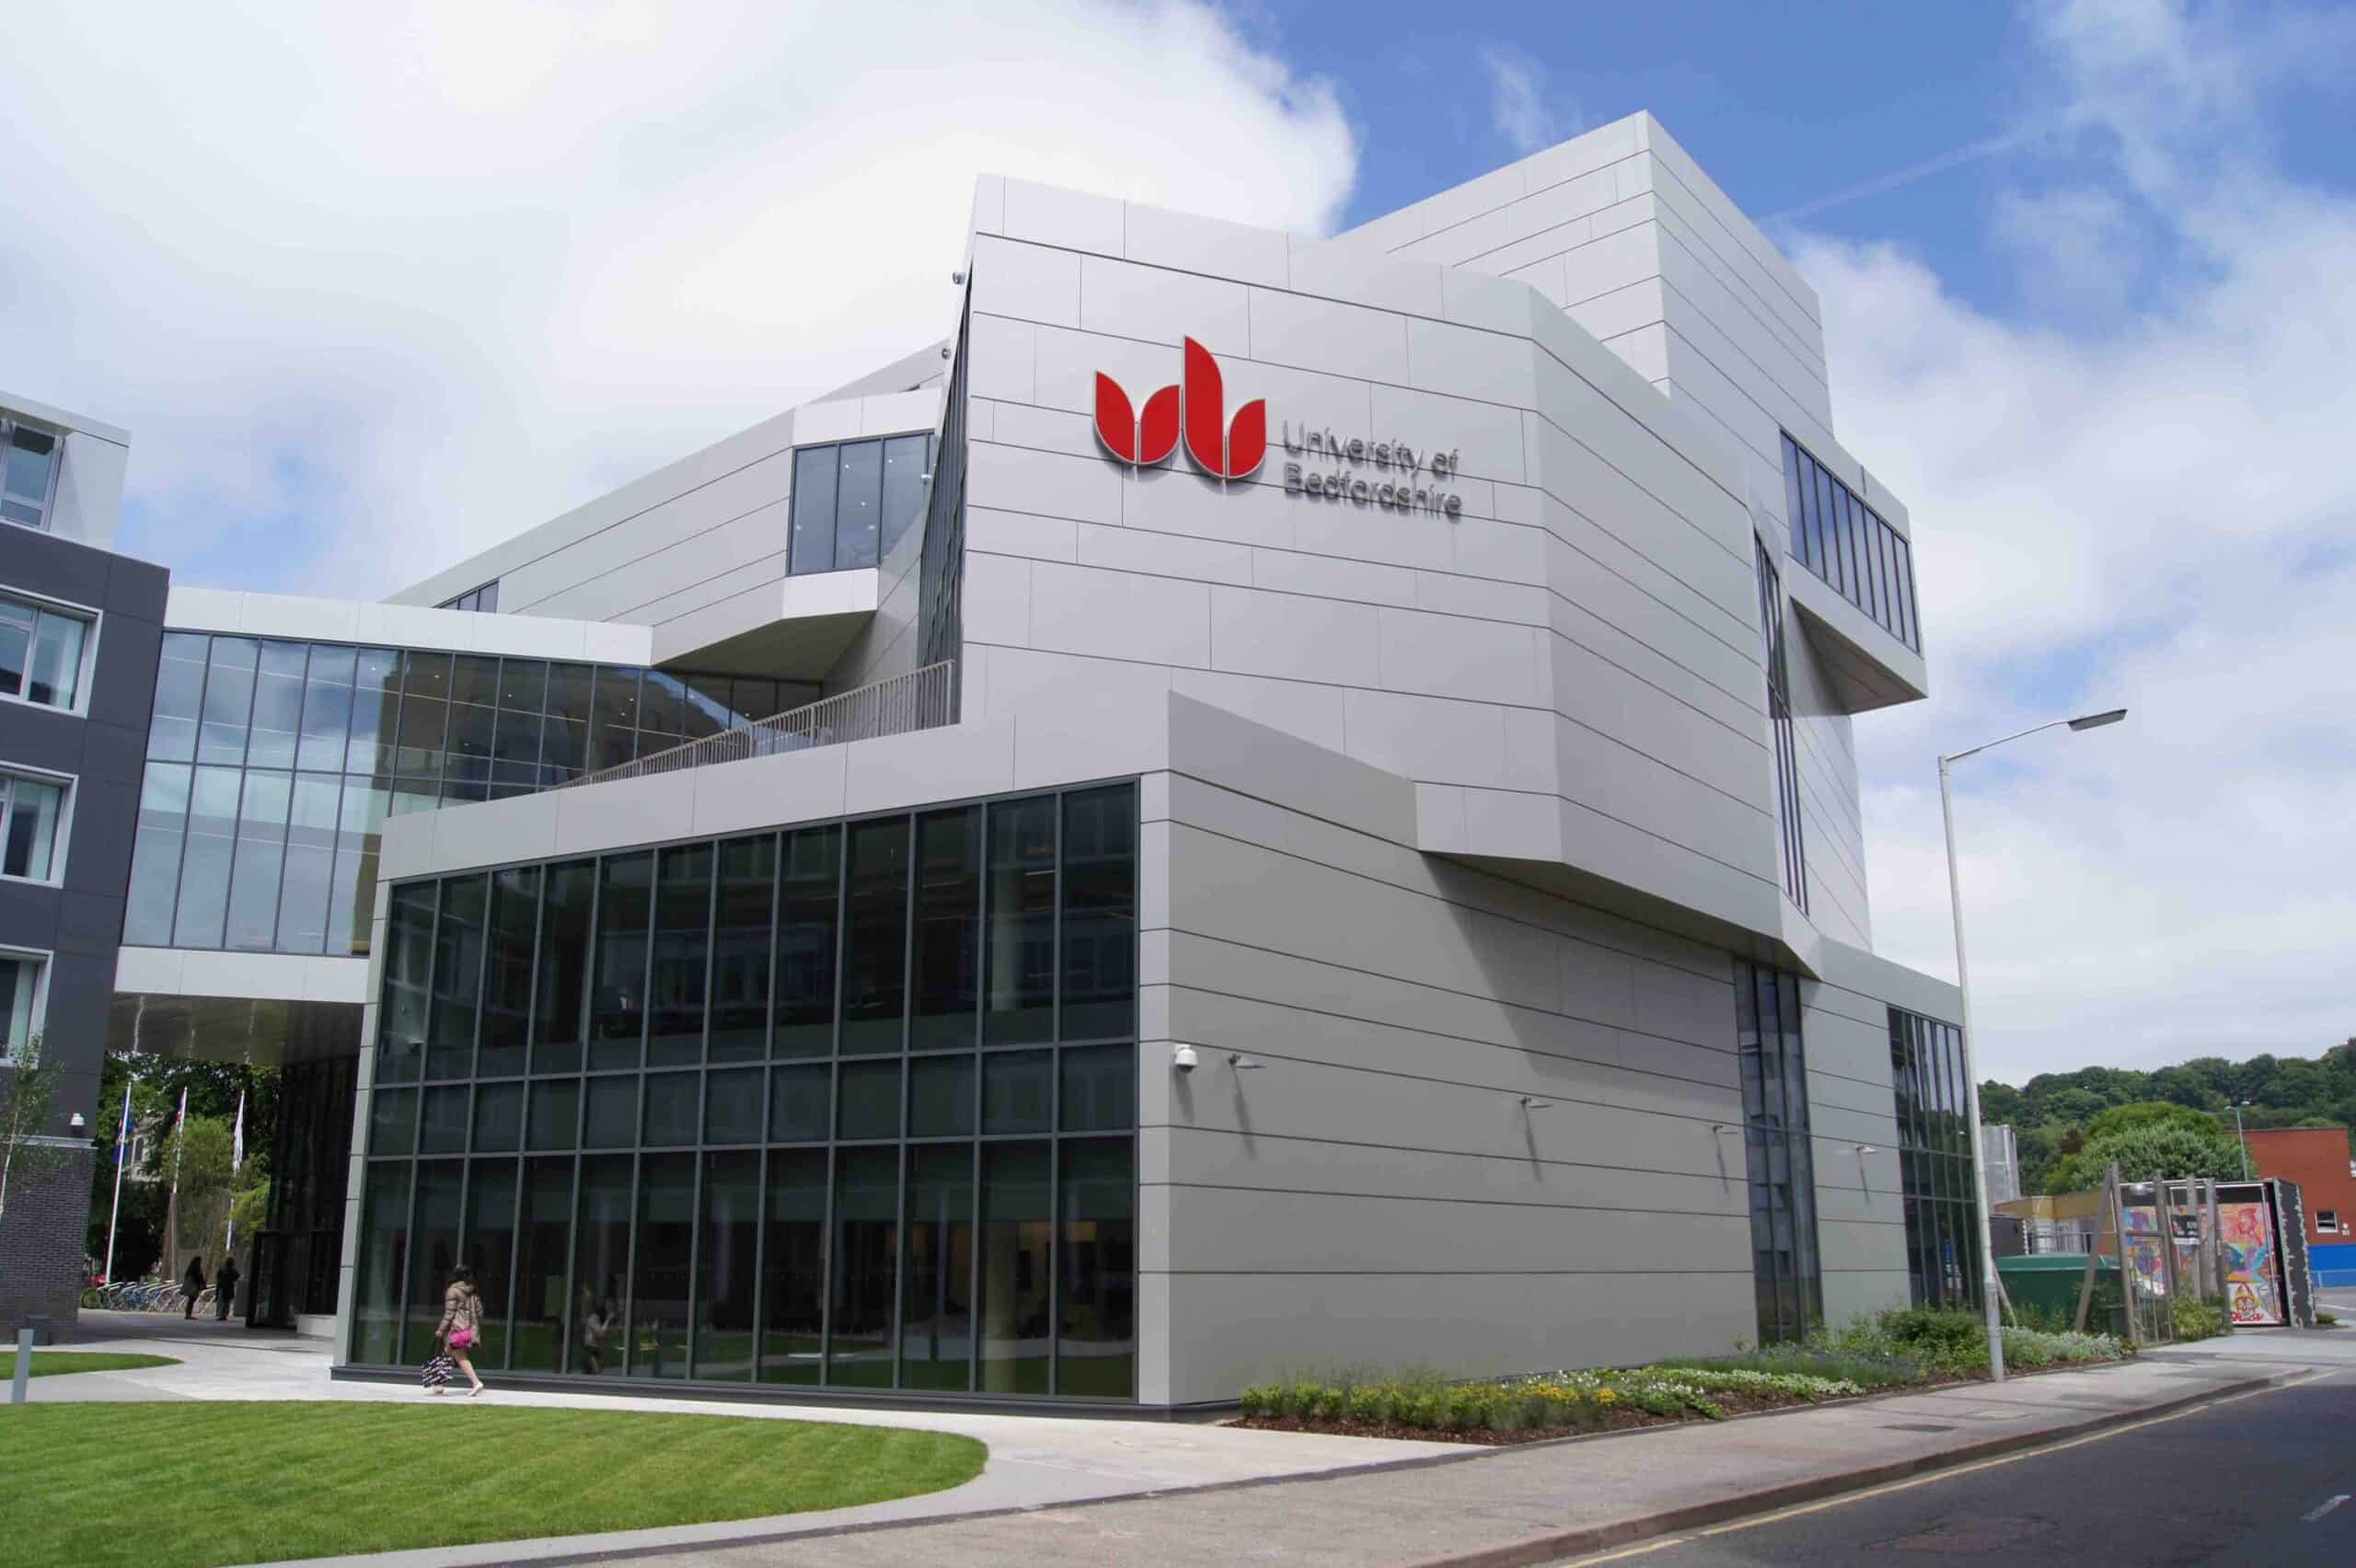 You are currently viewing University of Bedfordshire